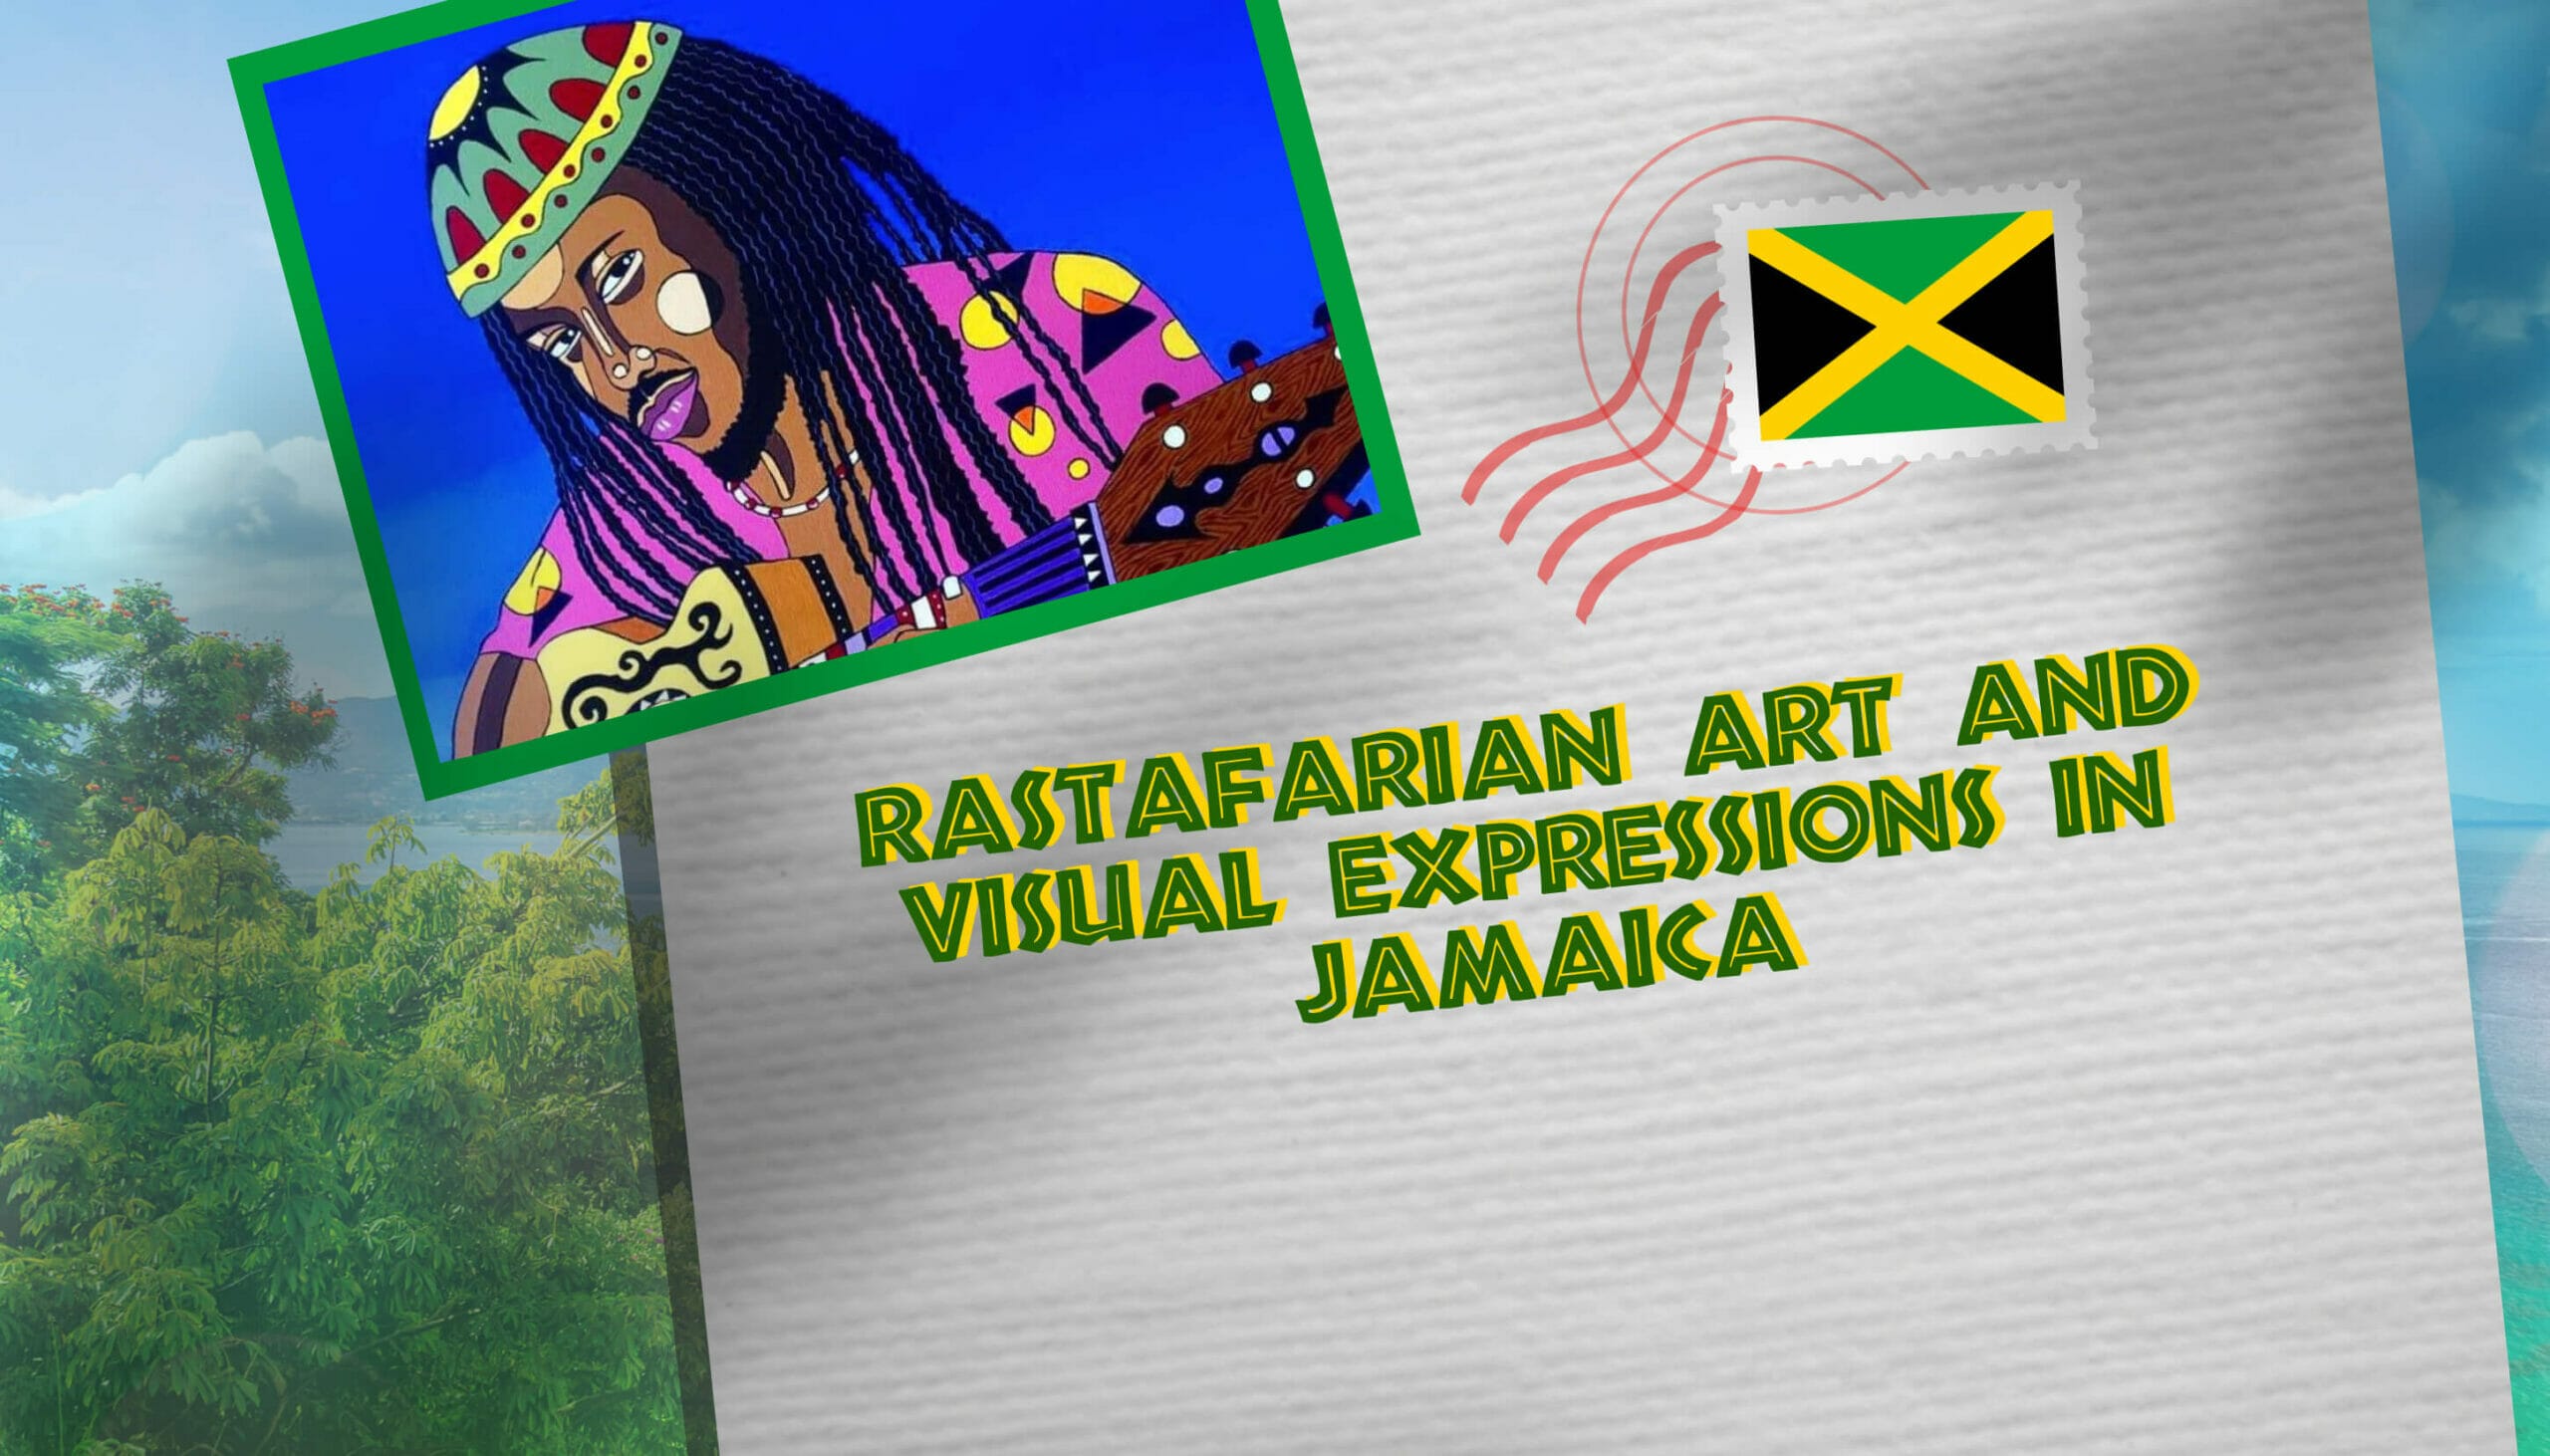 Rastafarian art and visual expressions in Jamaica